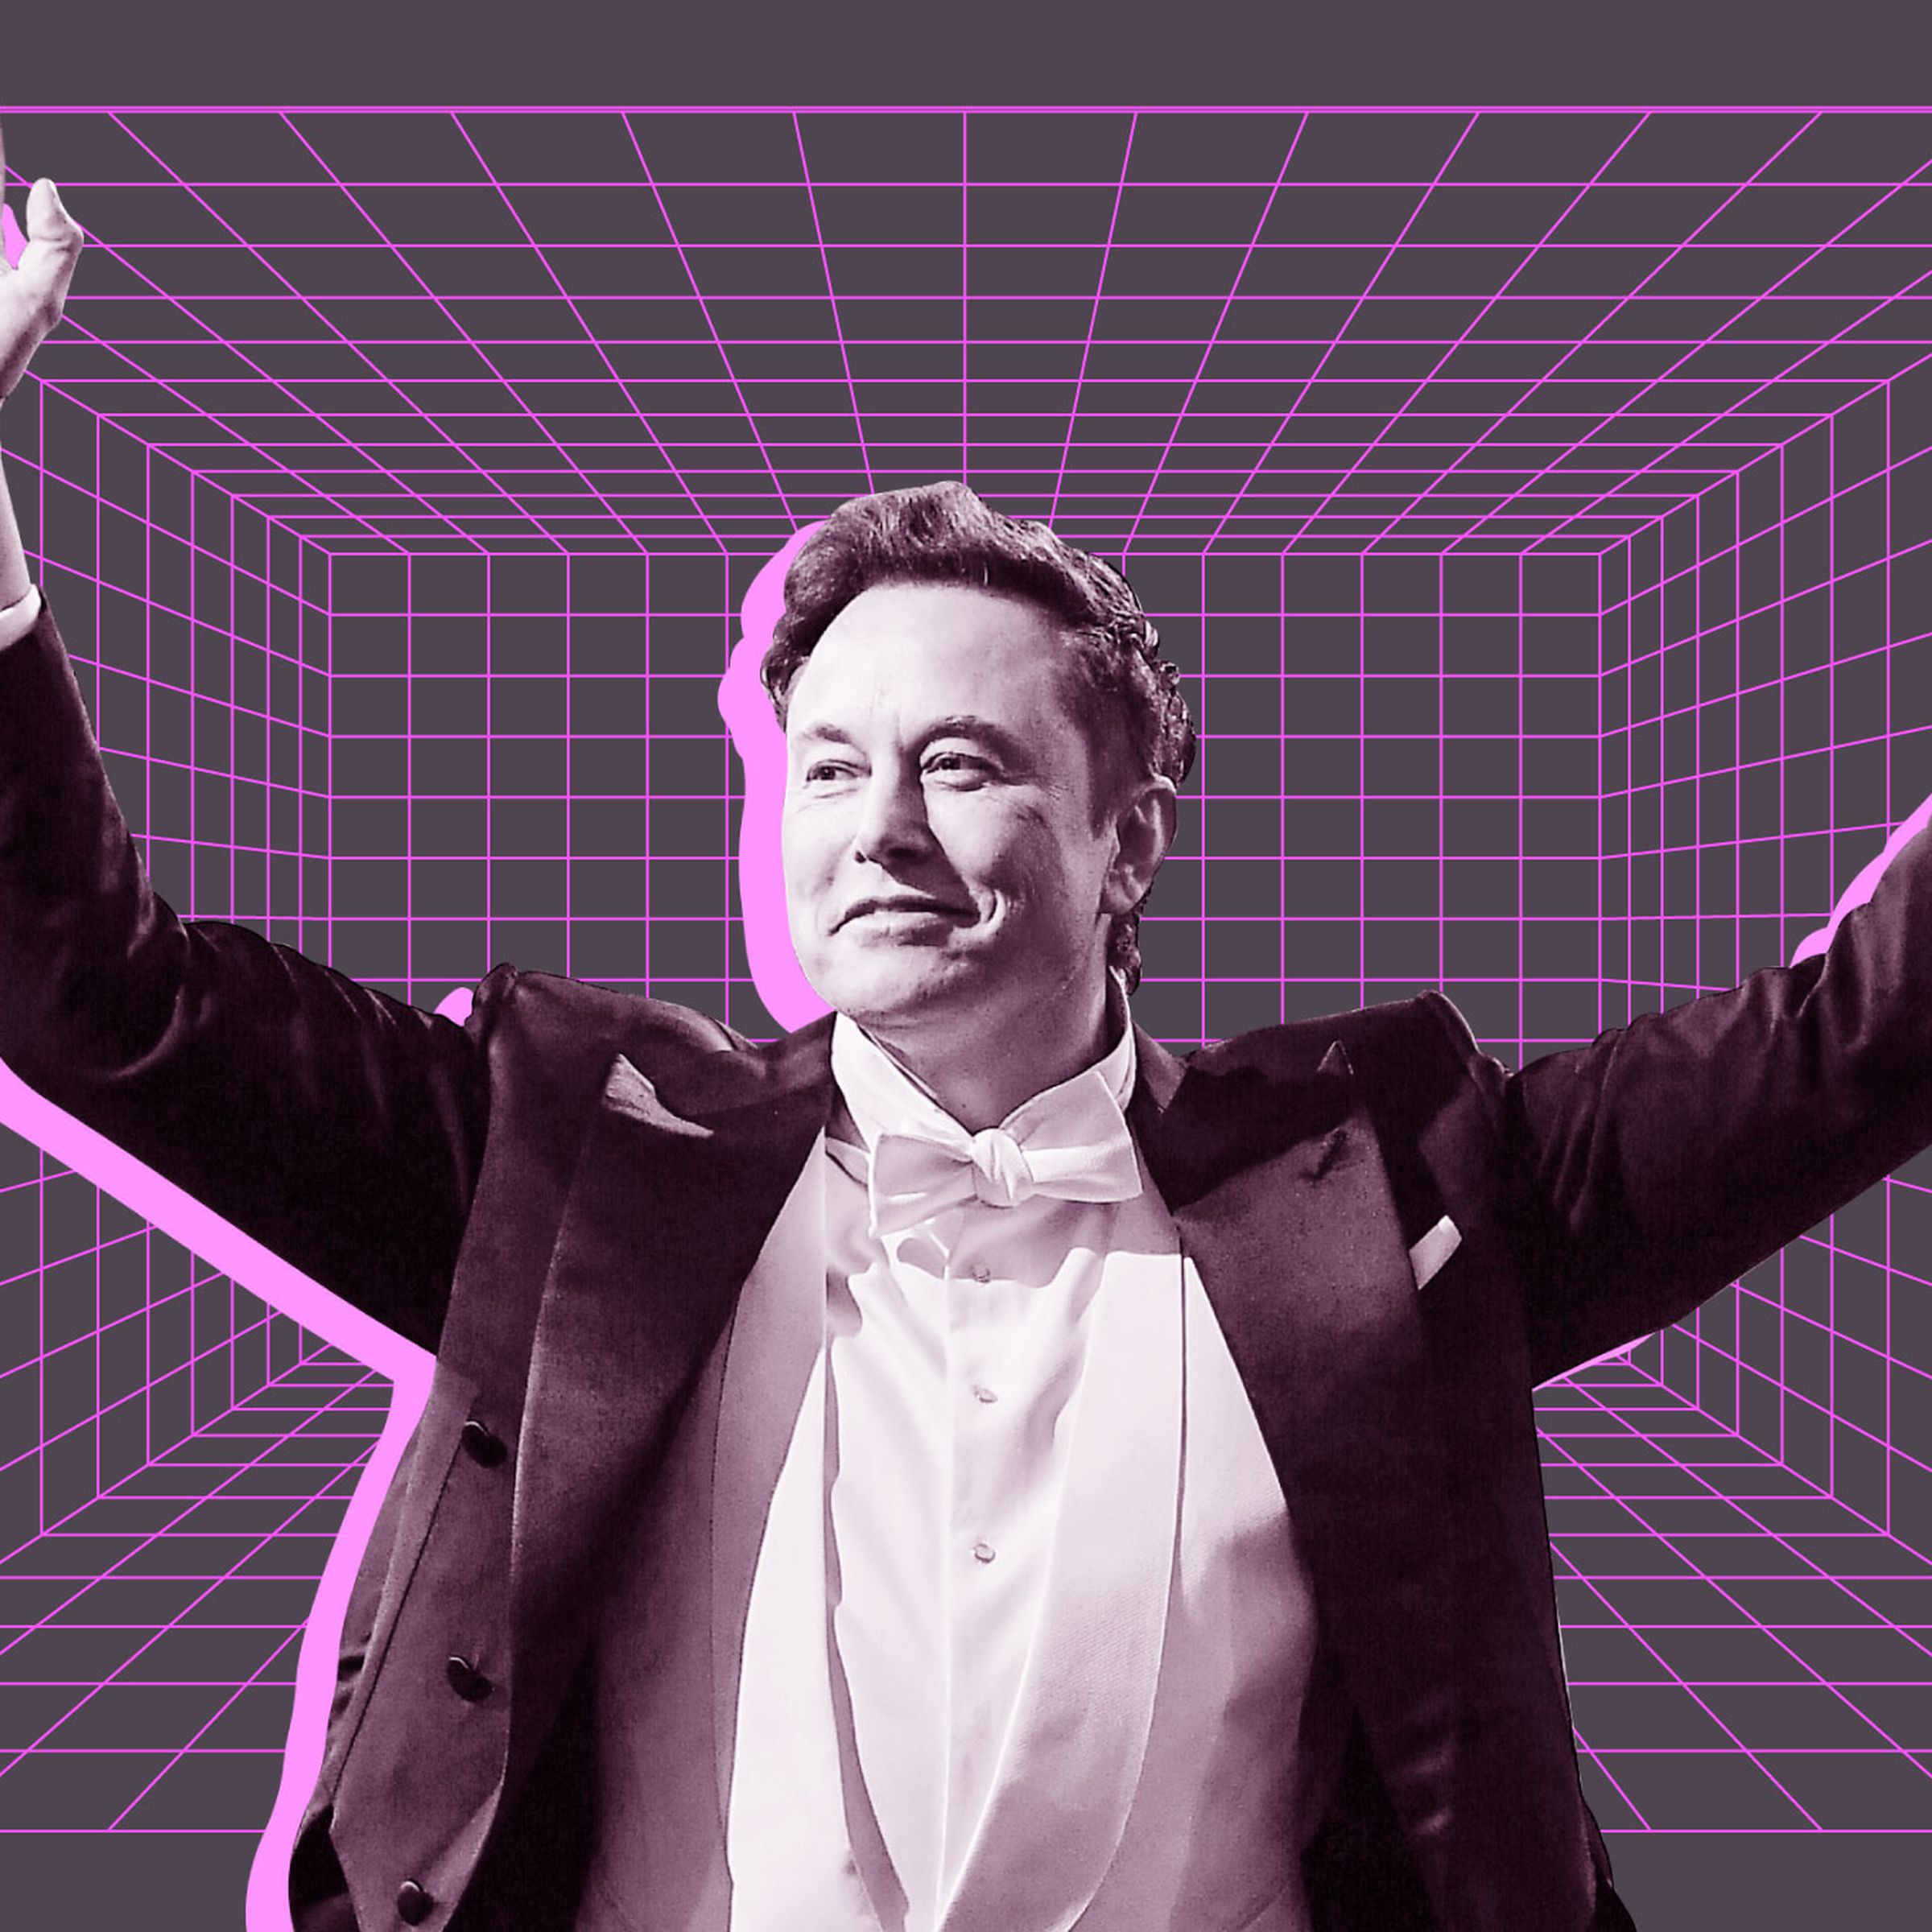 Elon Musk grins in a photo illustration, lifting his arms over his head triumphantly